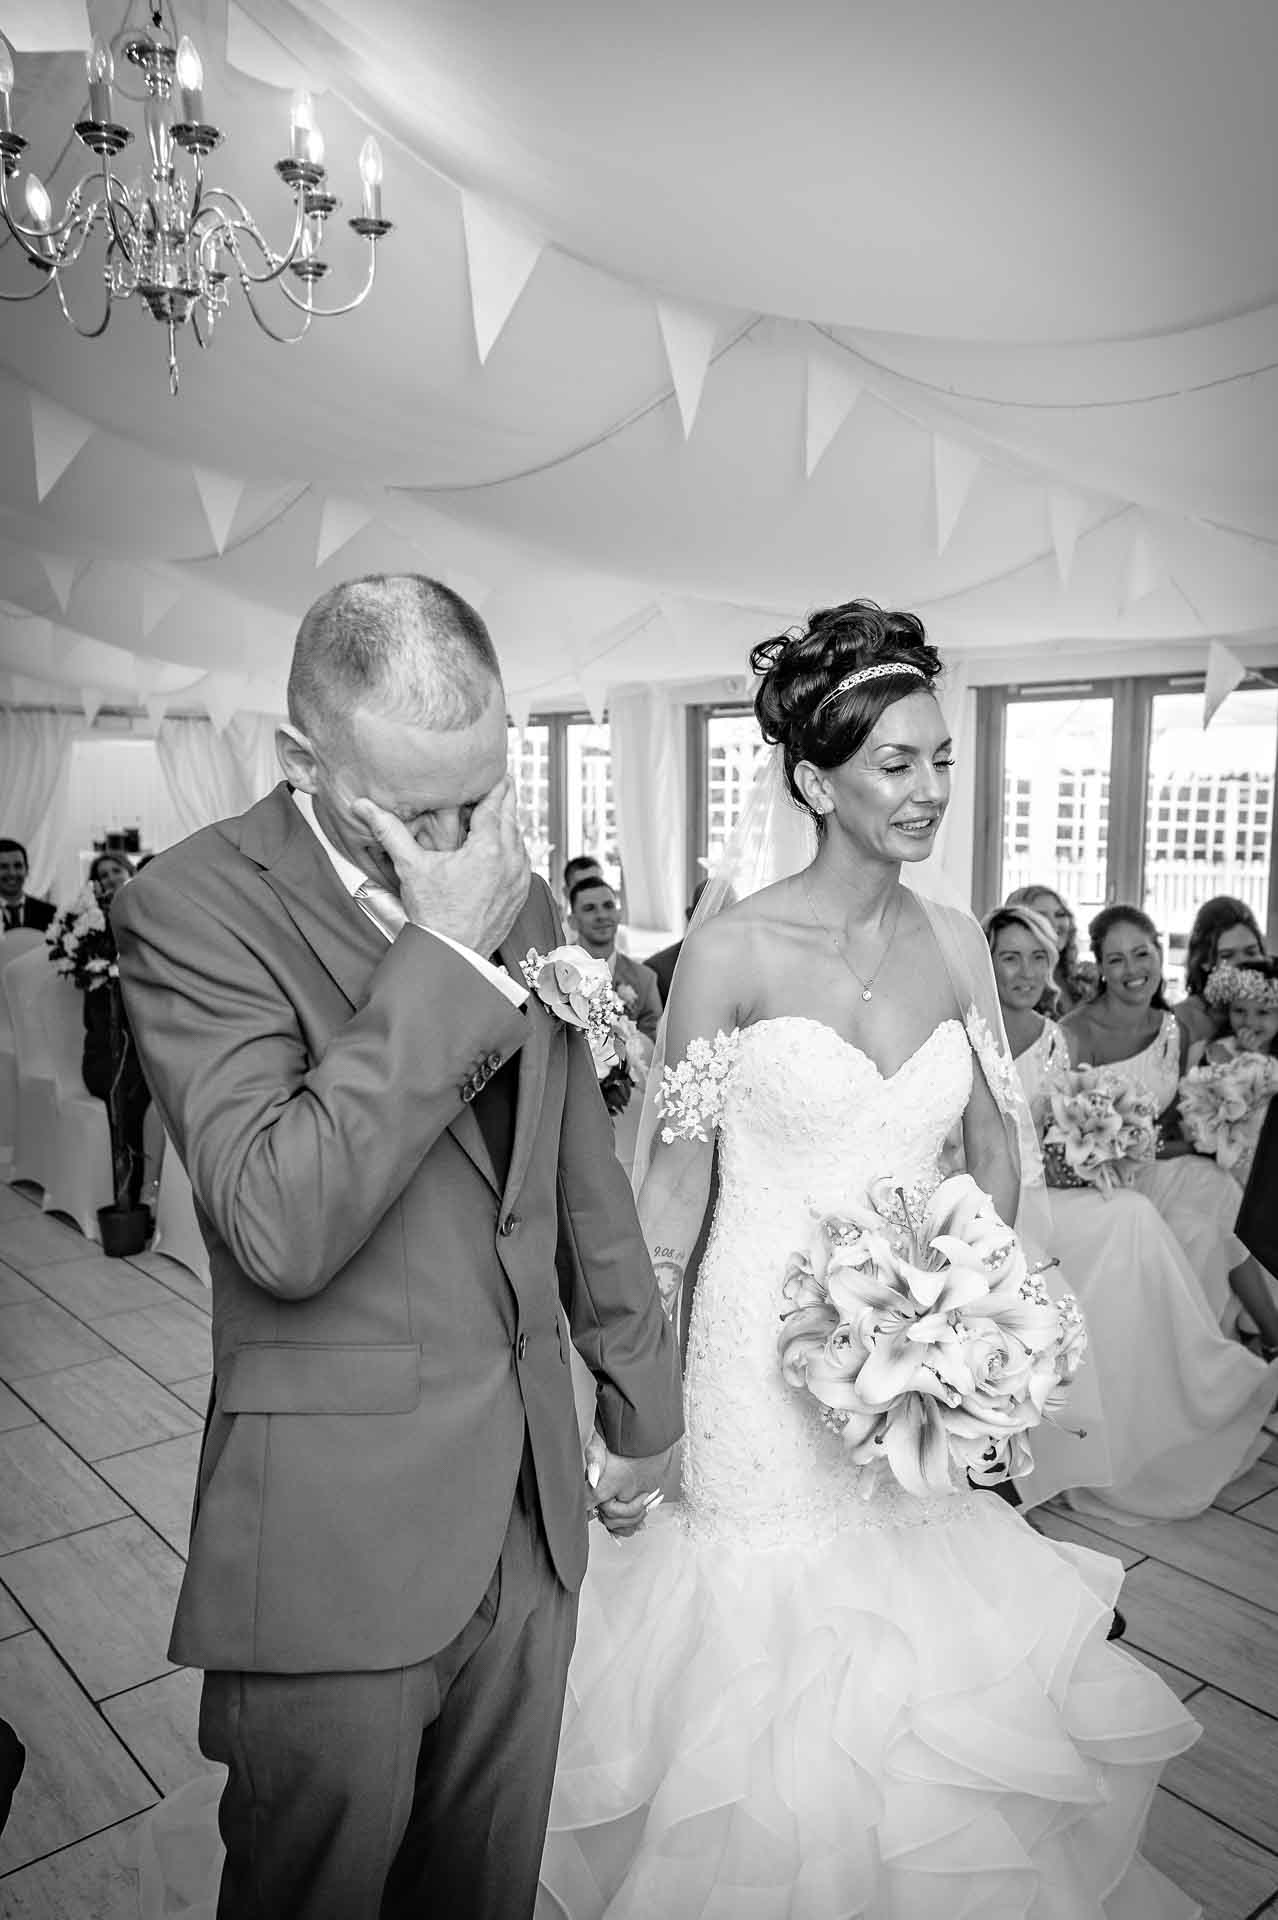 The groom rubs his eyes in emotion at wedding in Caerphilly